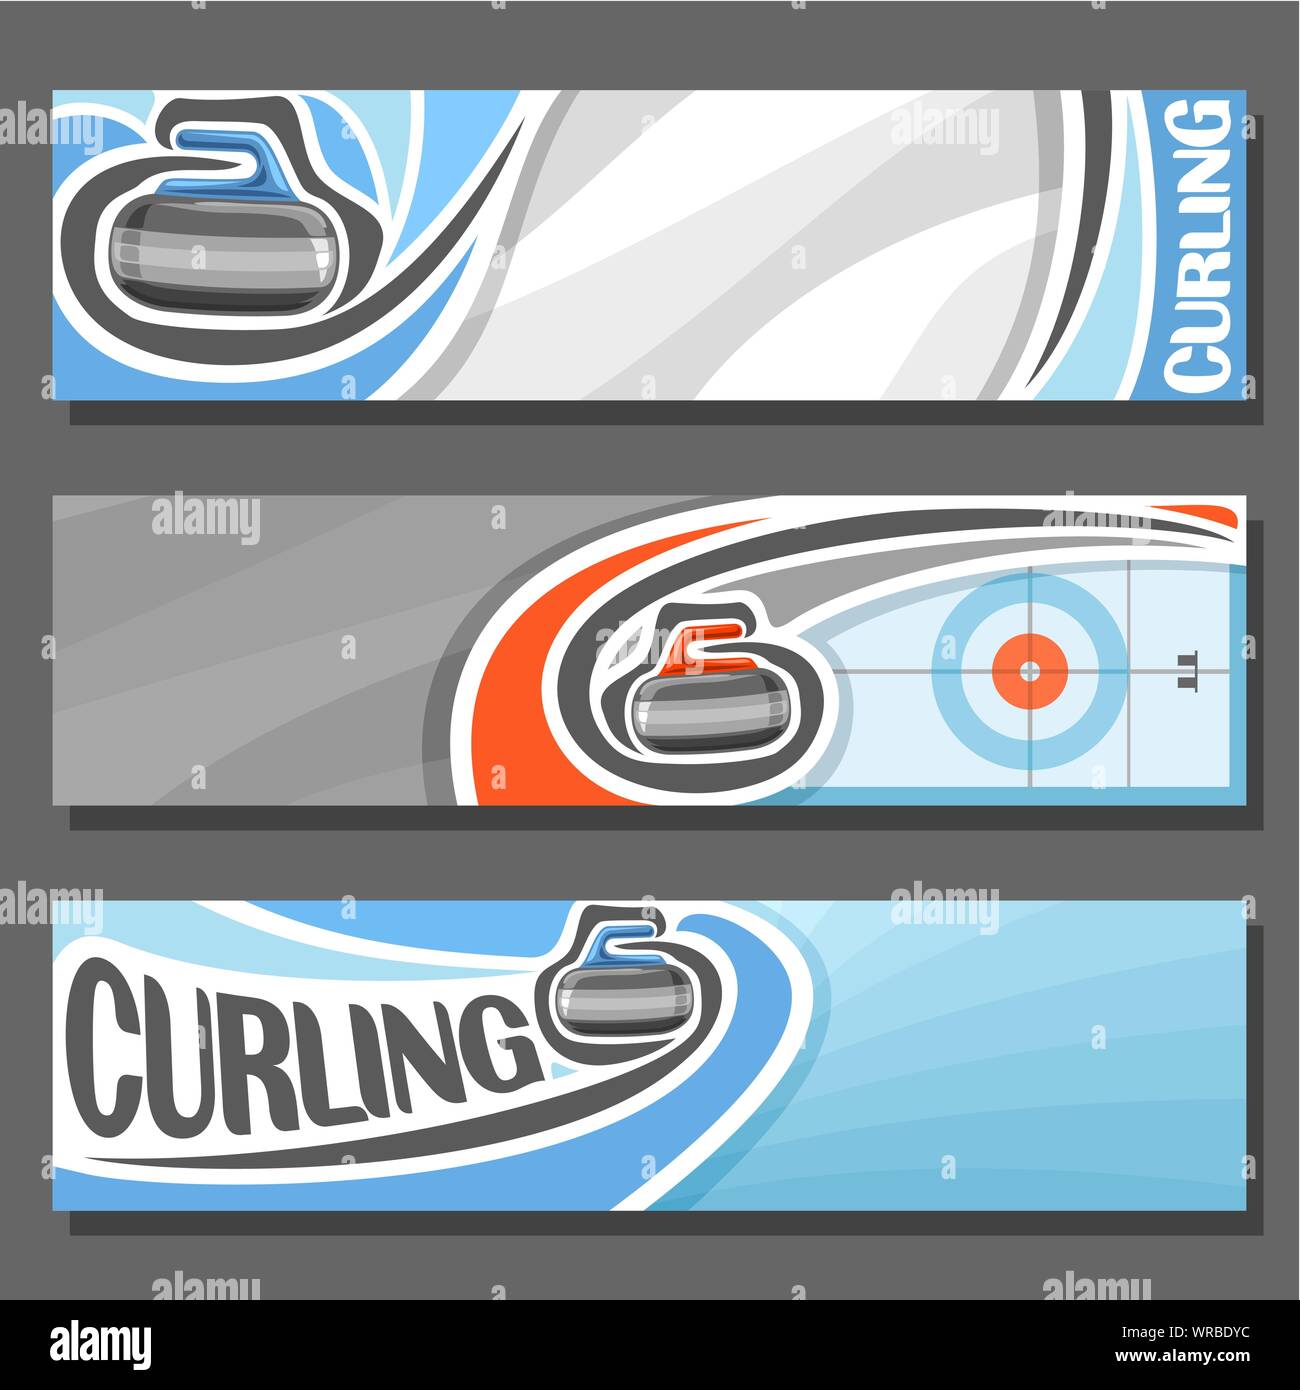 Vector horizontal banners for Curling: 3 cartoon covers for text on curling theme, on ice rink granite stone sliding in target on gray background. Stock Vector